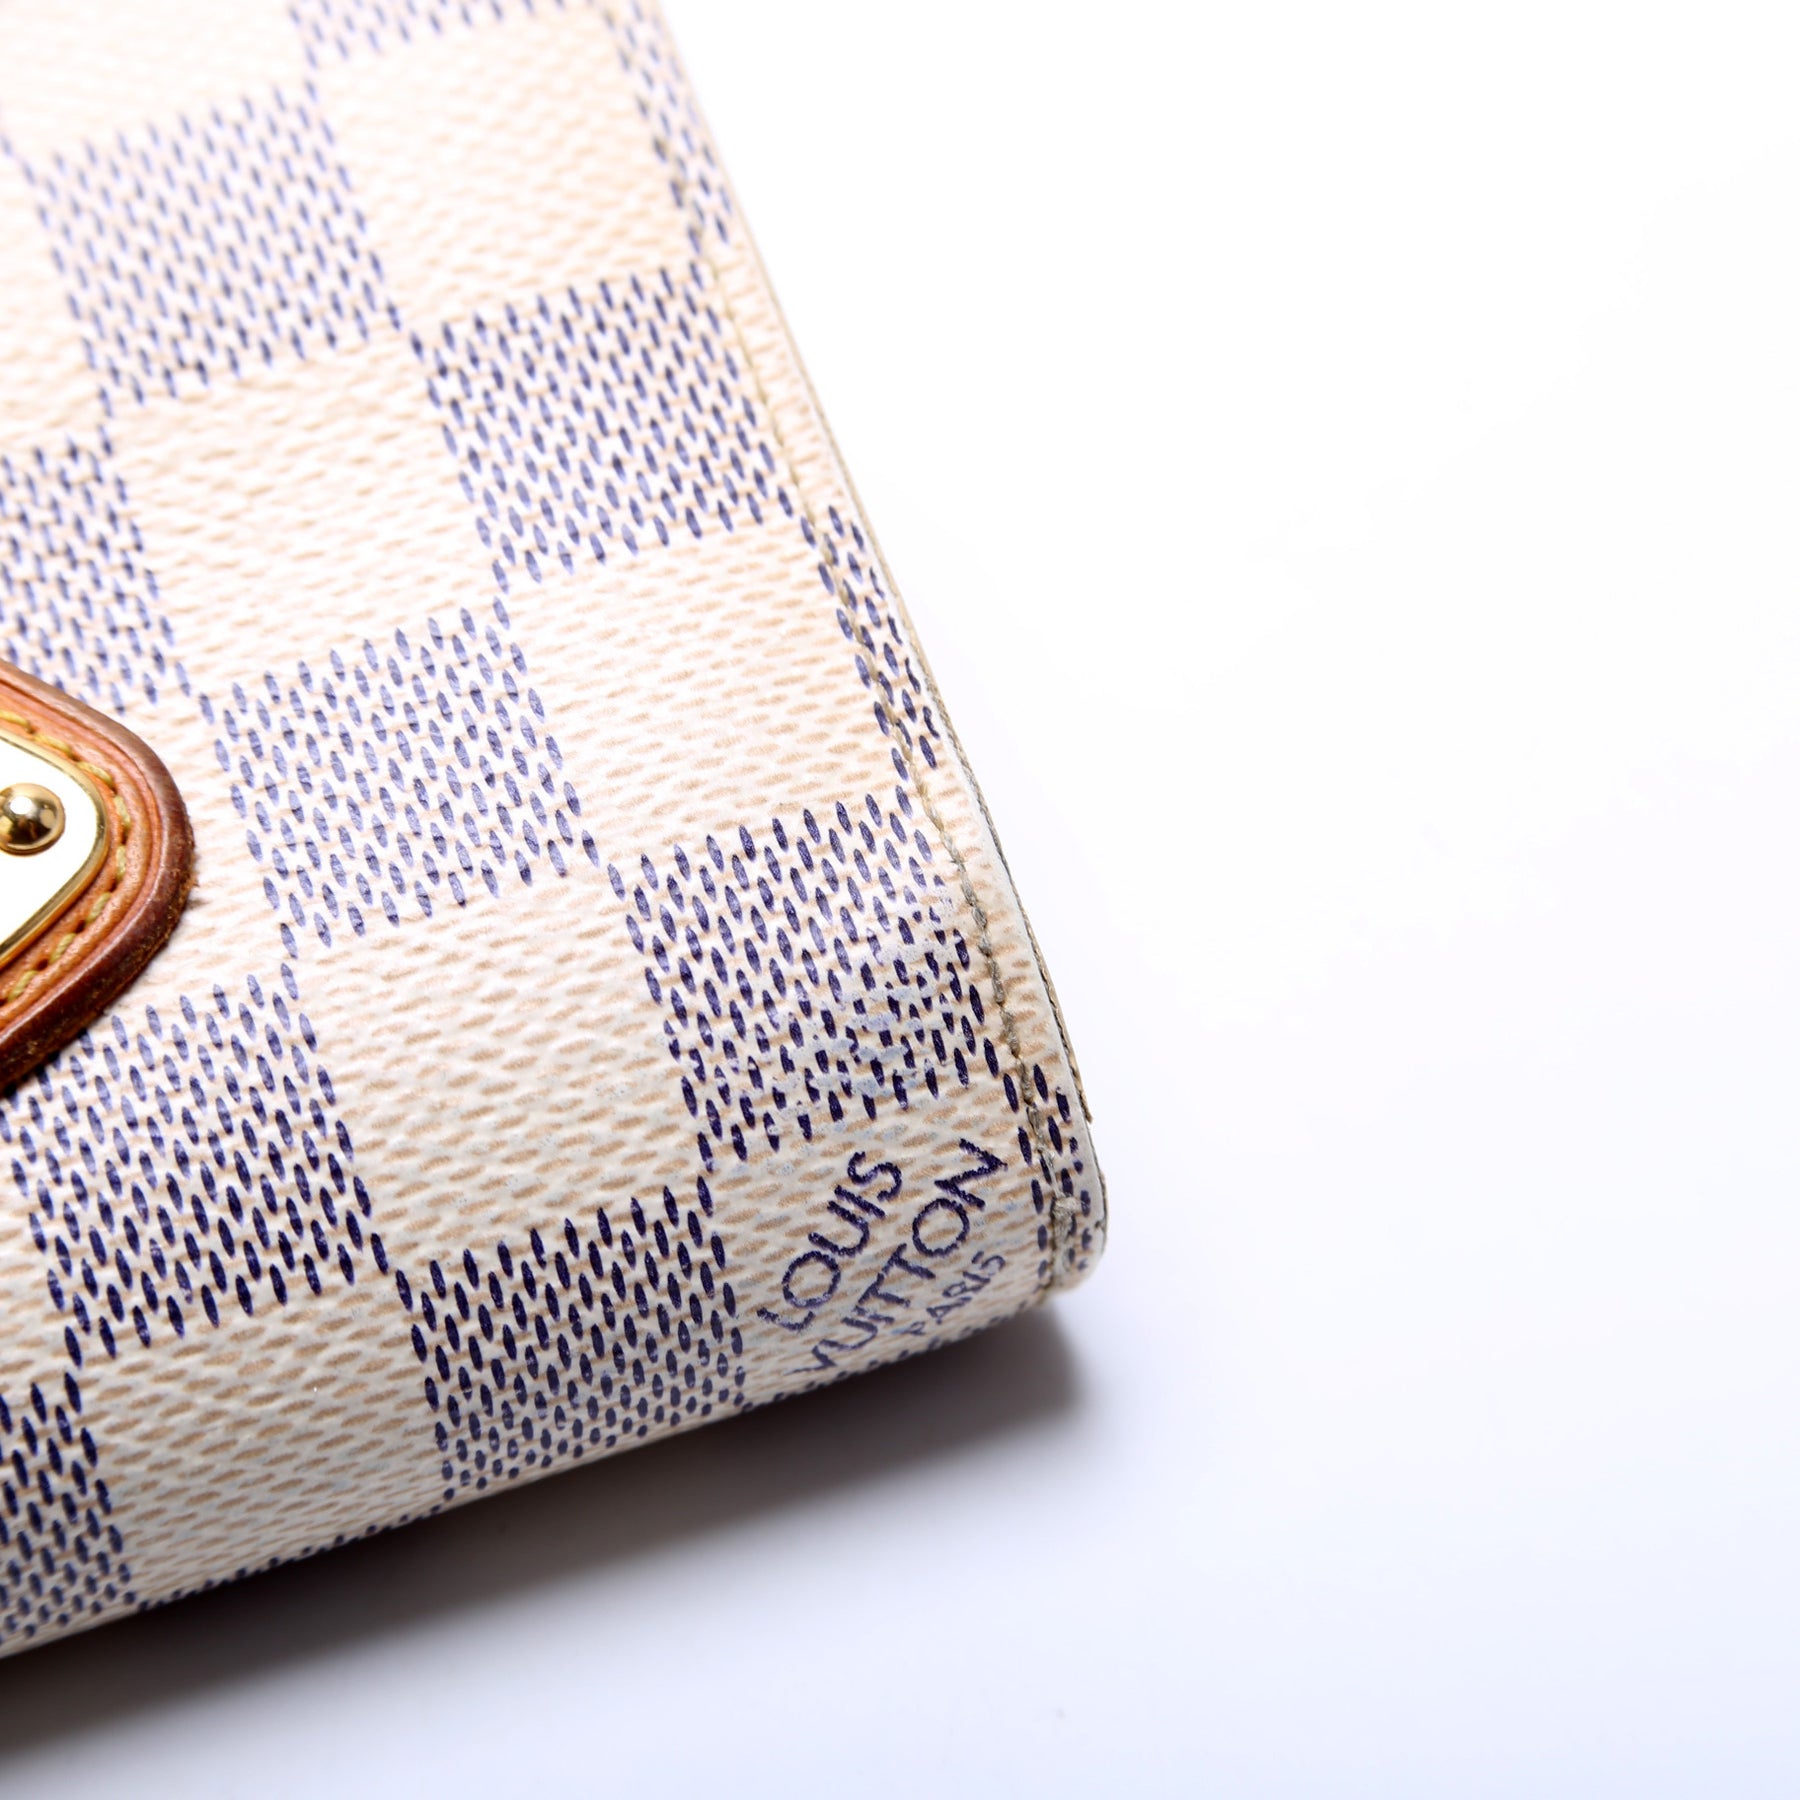 Louis Vuitton Damier Azur Totally PM and Joey Compact Wallet now